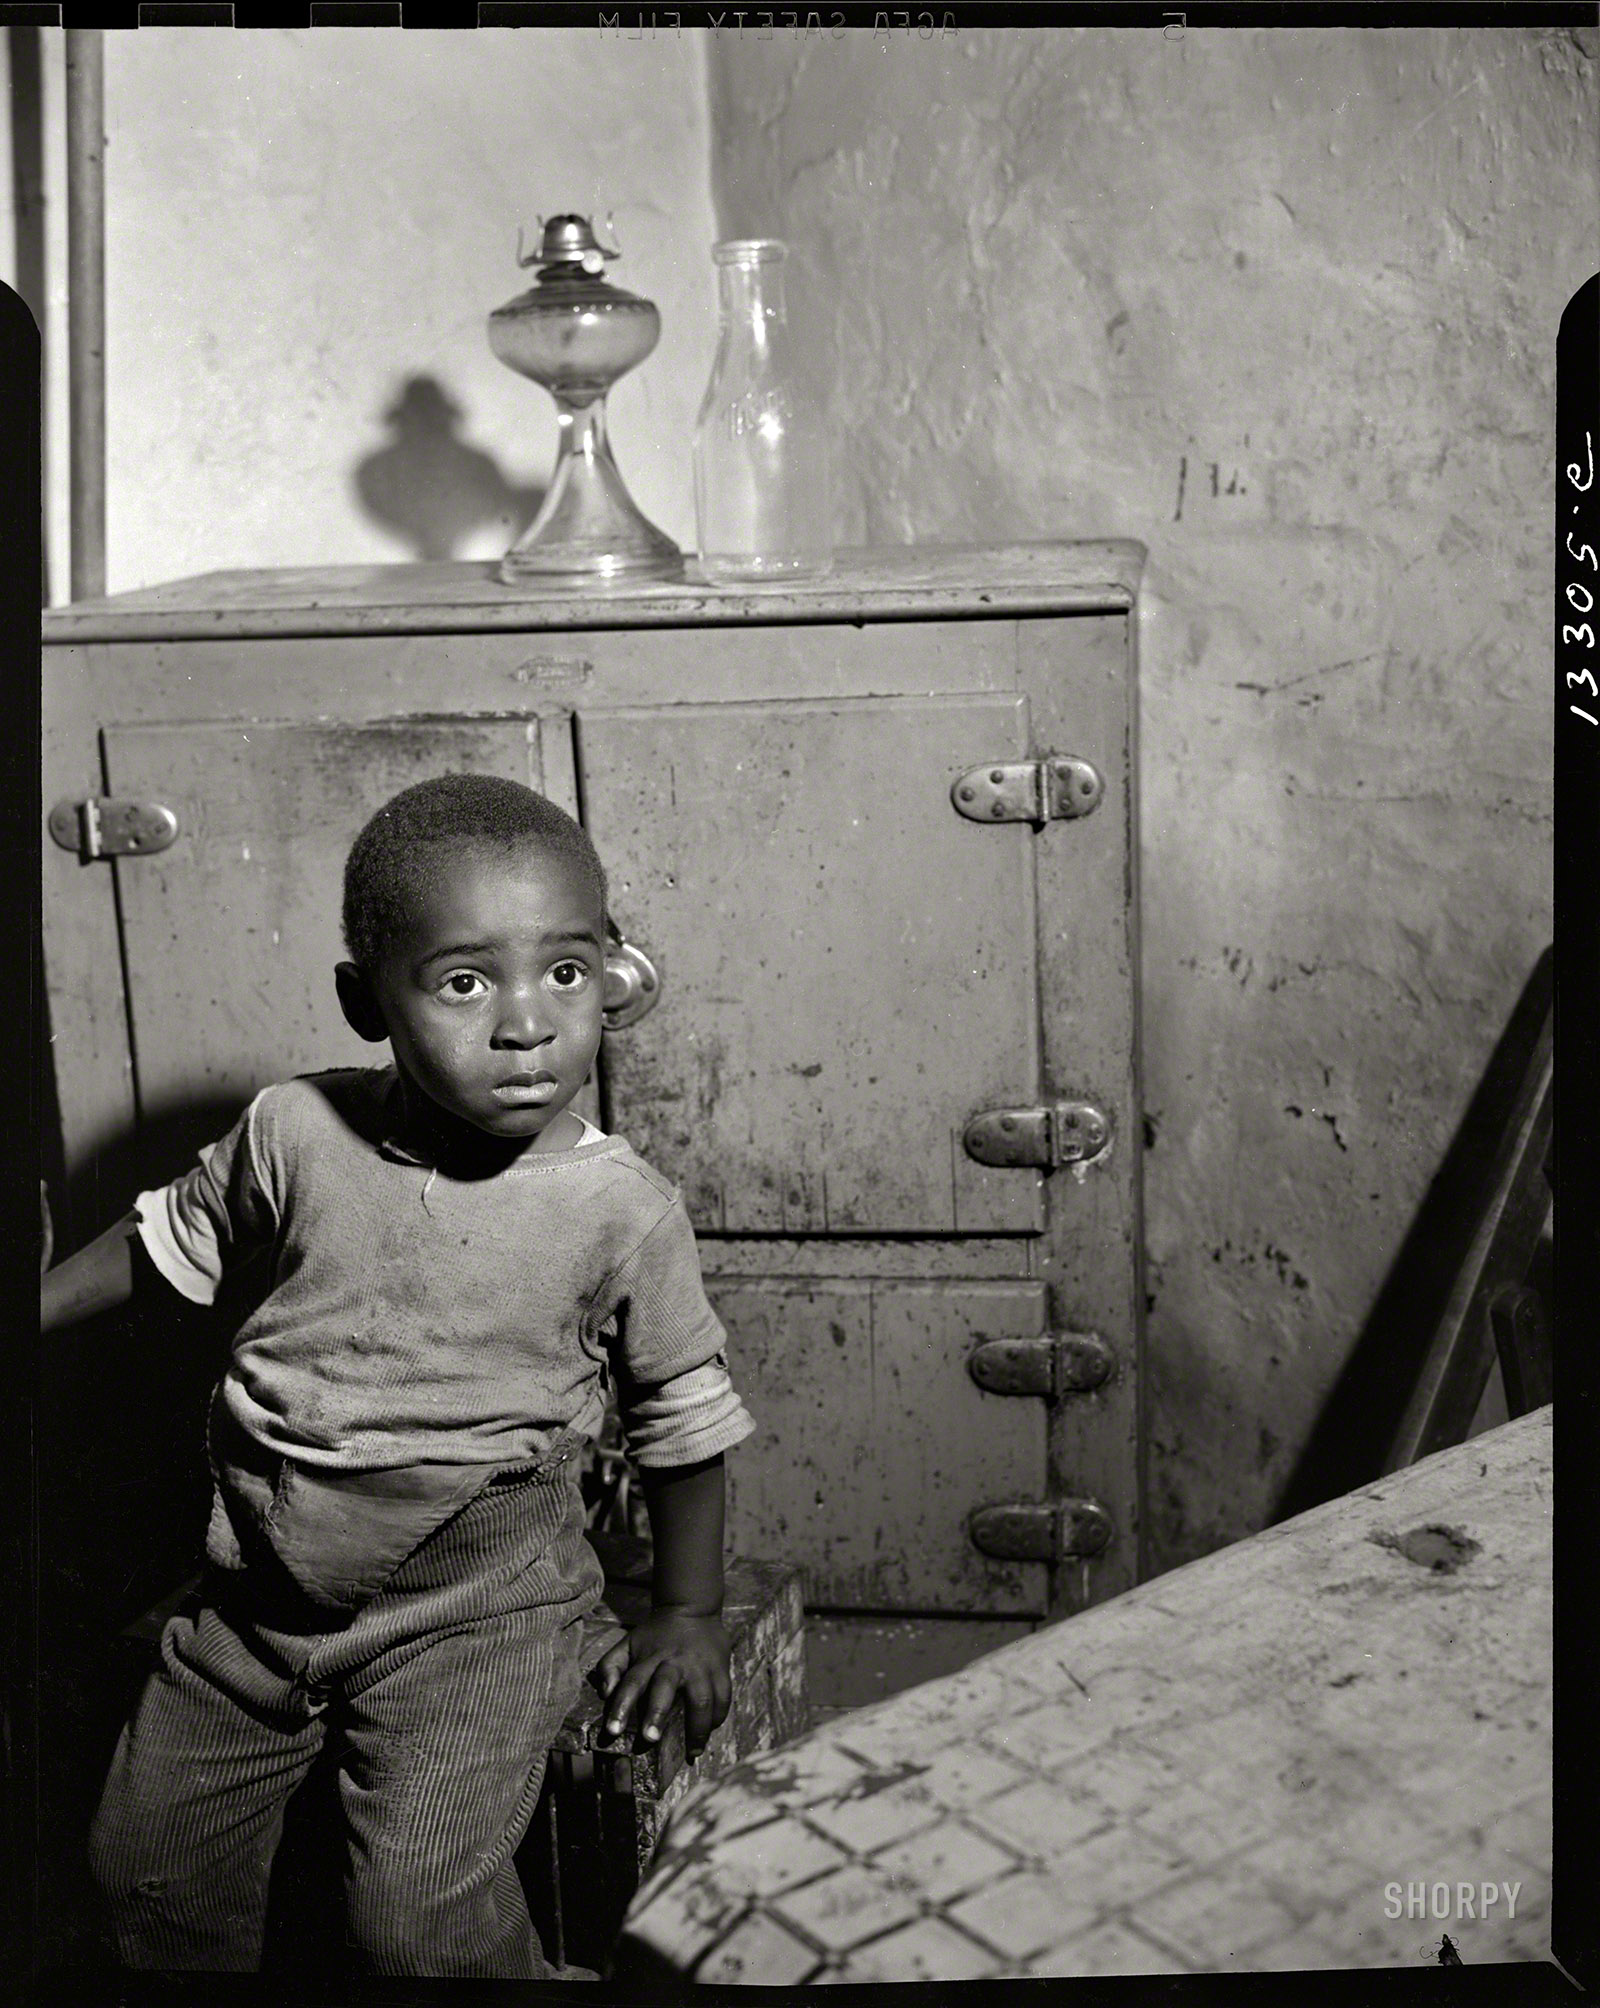 June 1942. Washington, D.C. "A young boy who lives near the nation's Capitol." Photo by Gordon Parks for the Office of War Information. View full size.